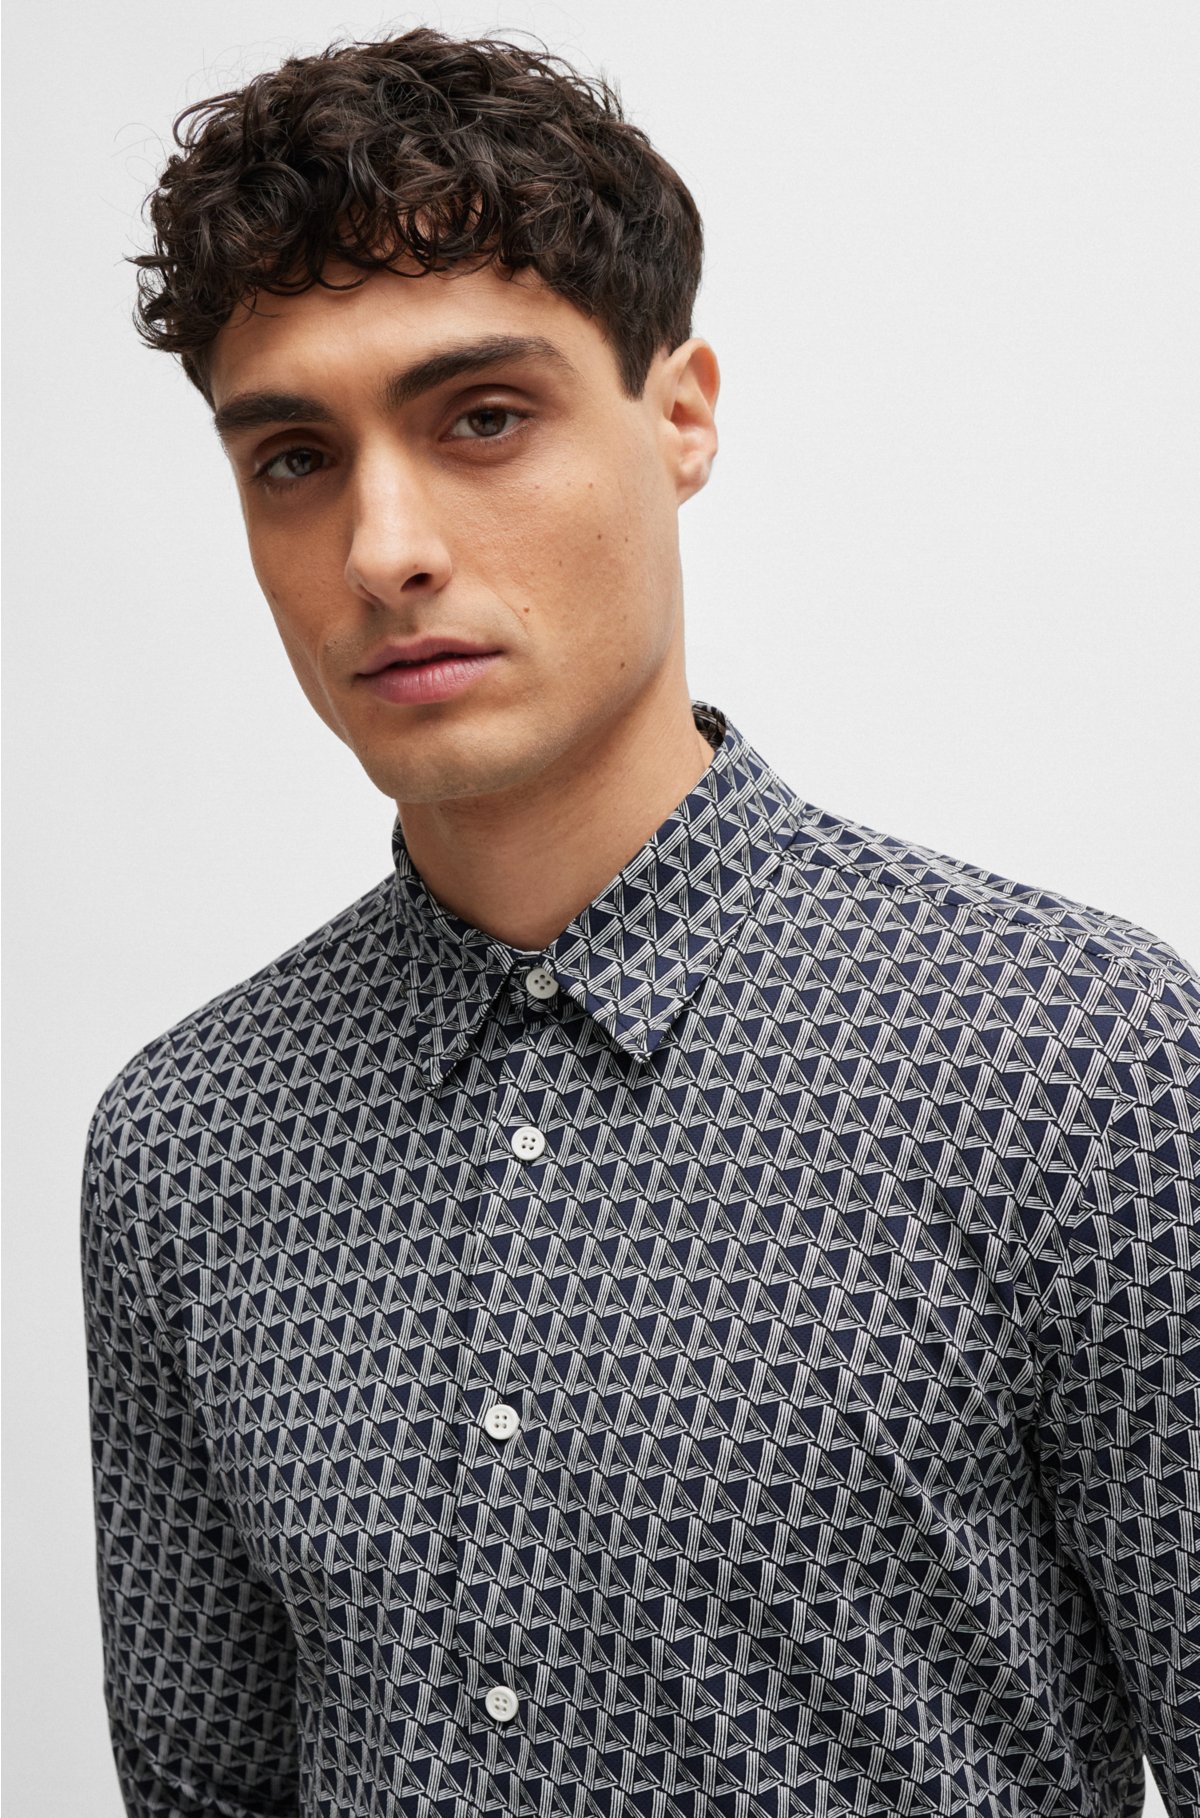 BOSS - Slim-fit shirt in printed performance-stretch material